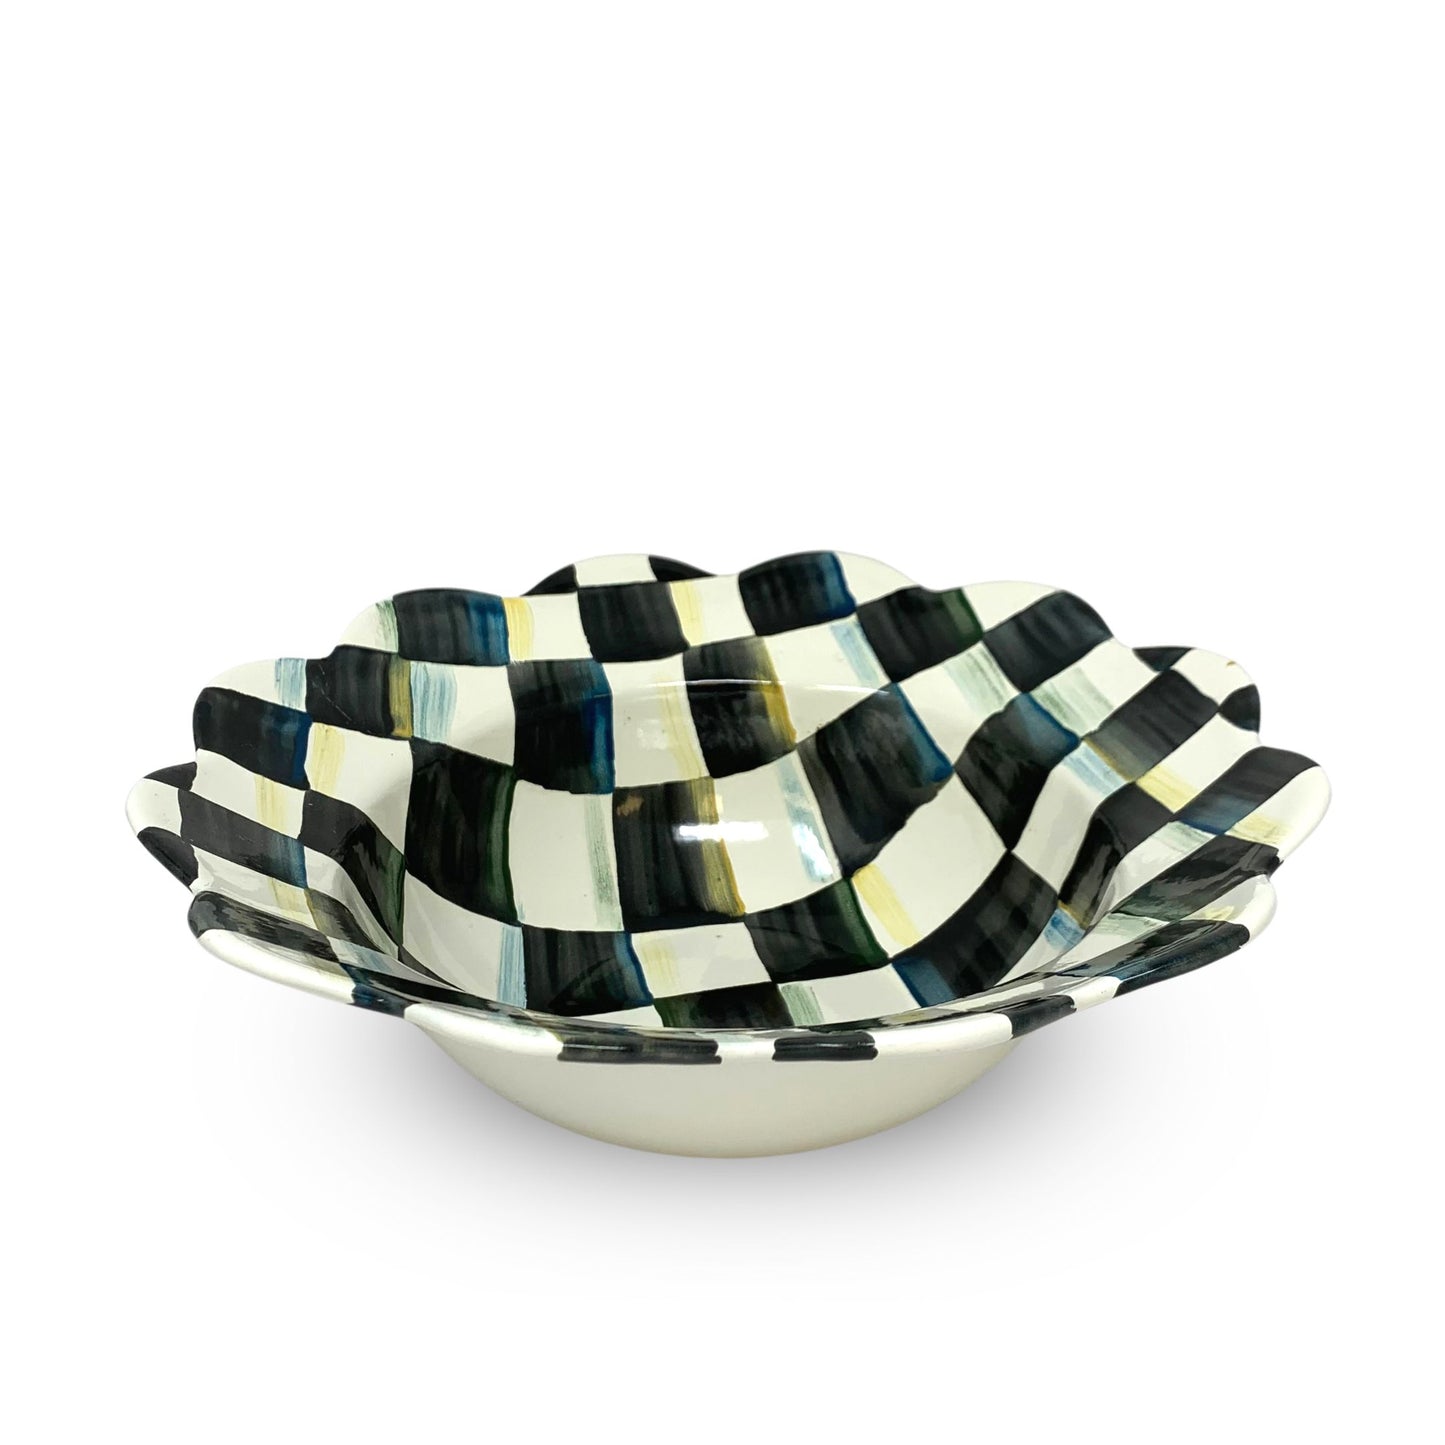 Mackenzie-Childs Courtly Check Enameled Petal Bowl